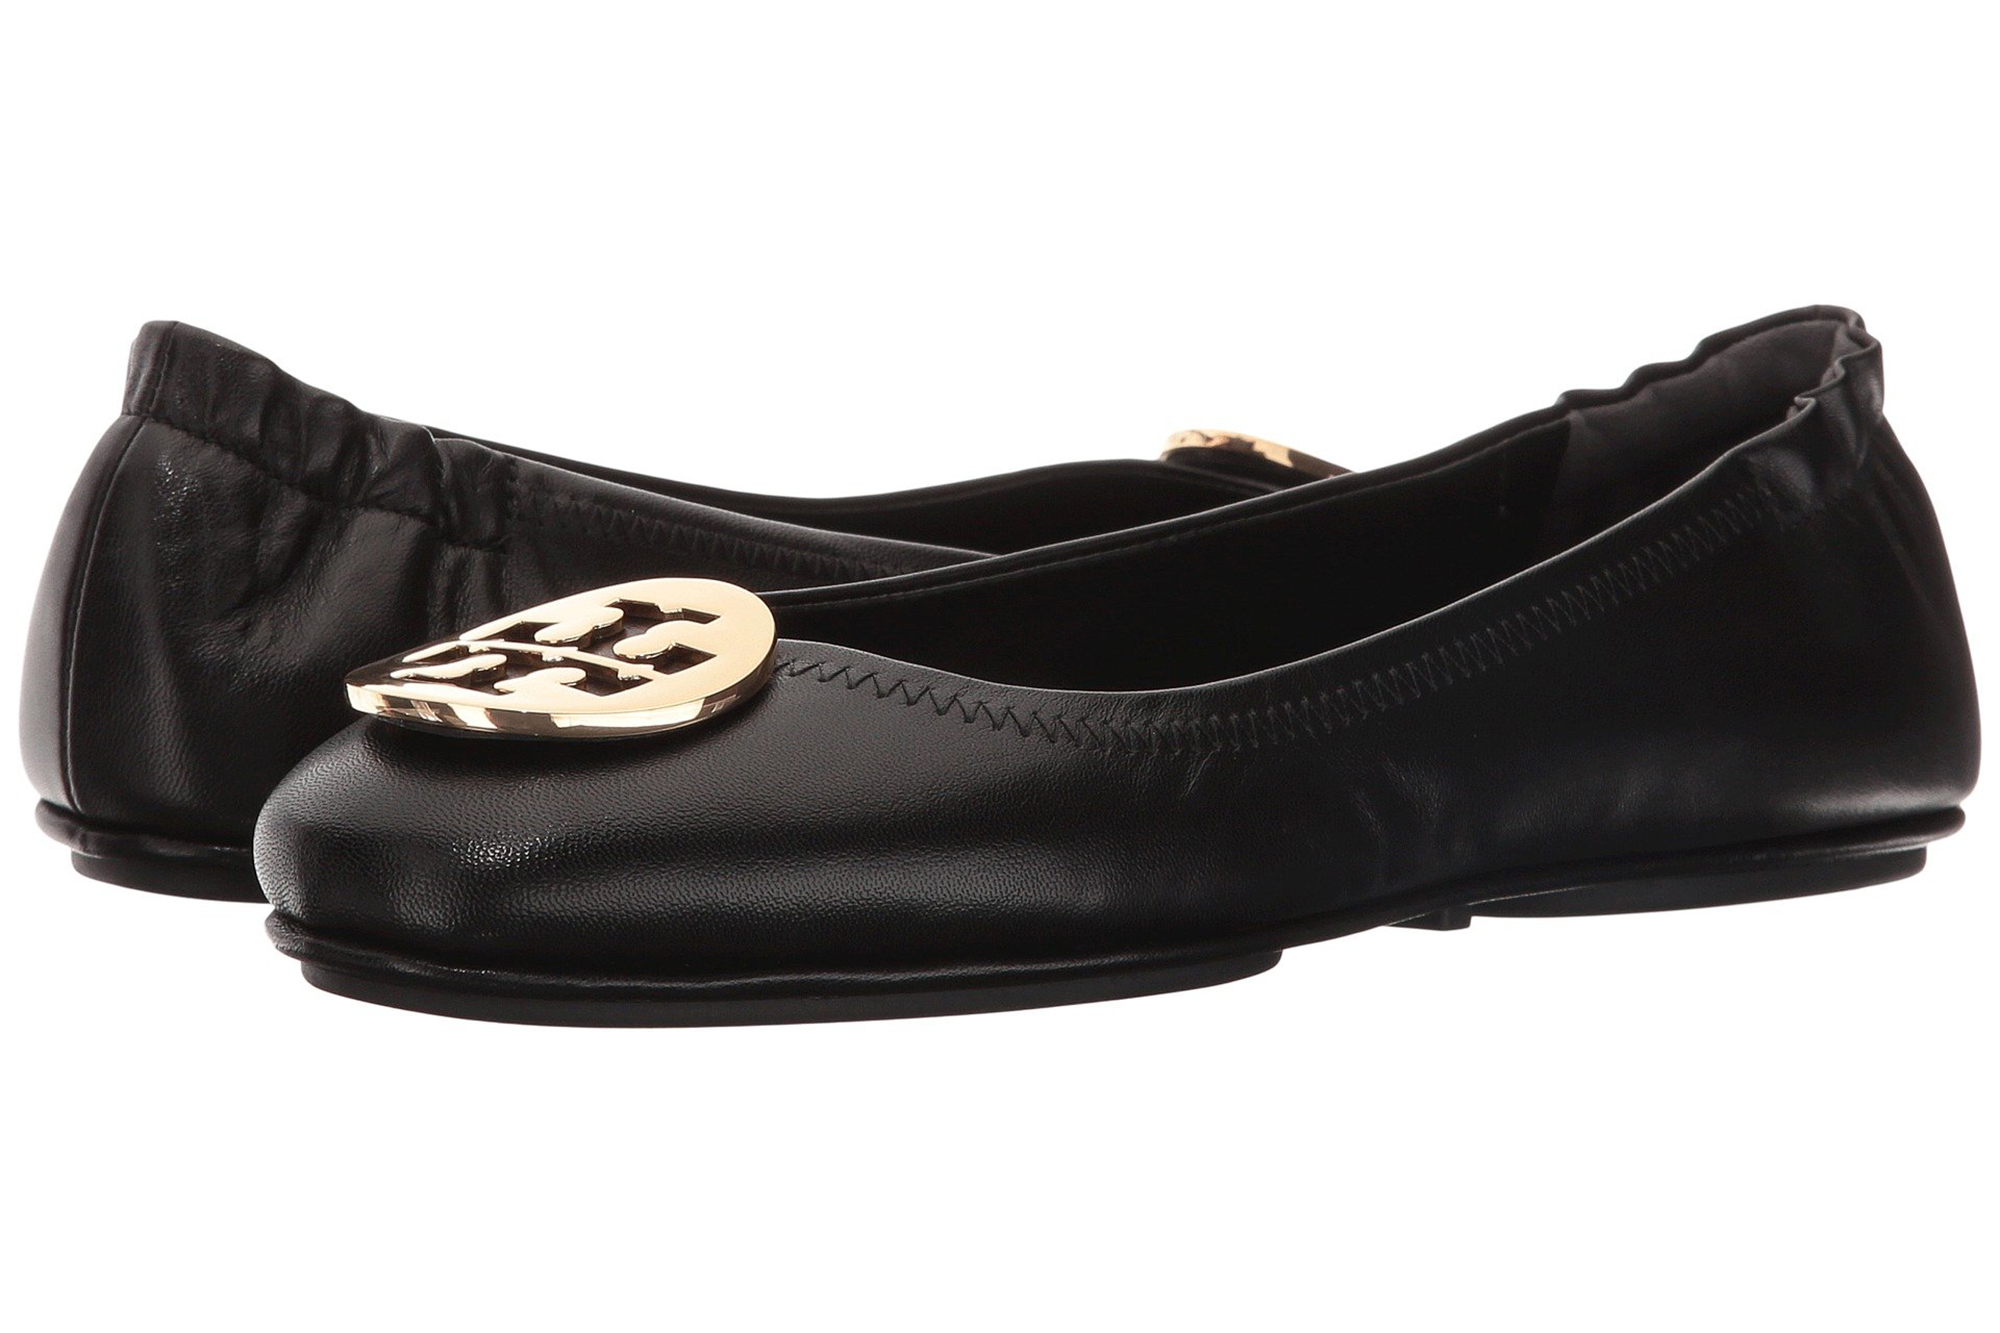 The Tory Burch Flats Every Woman Should Own Come in 8 Colors